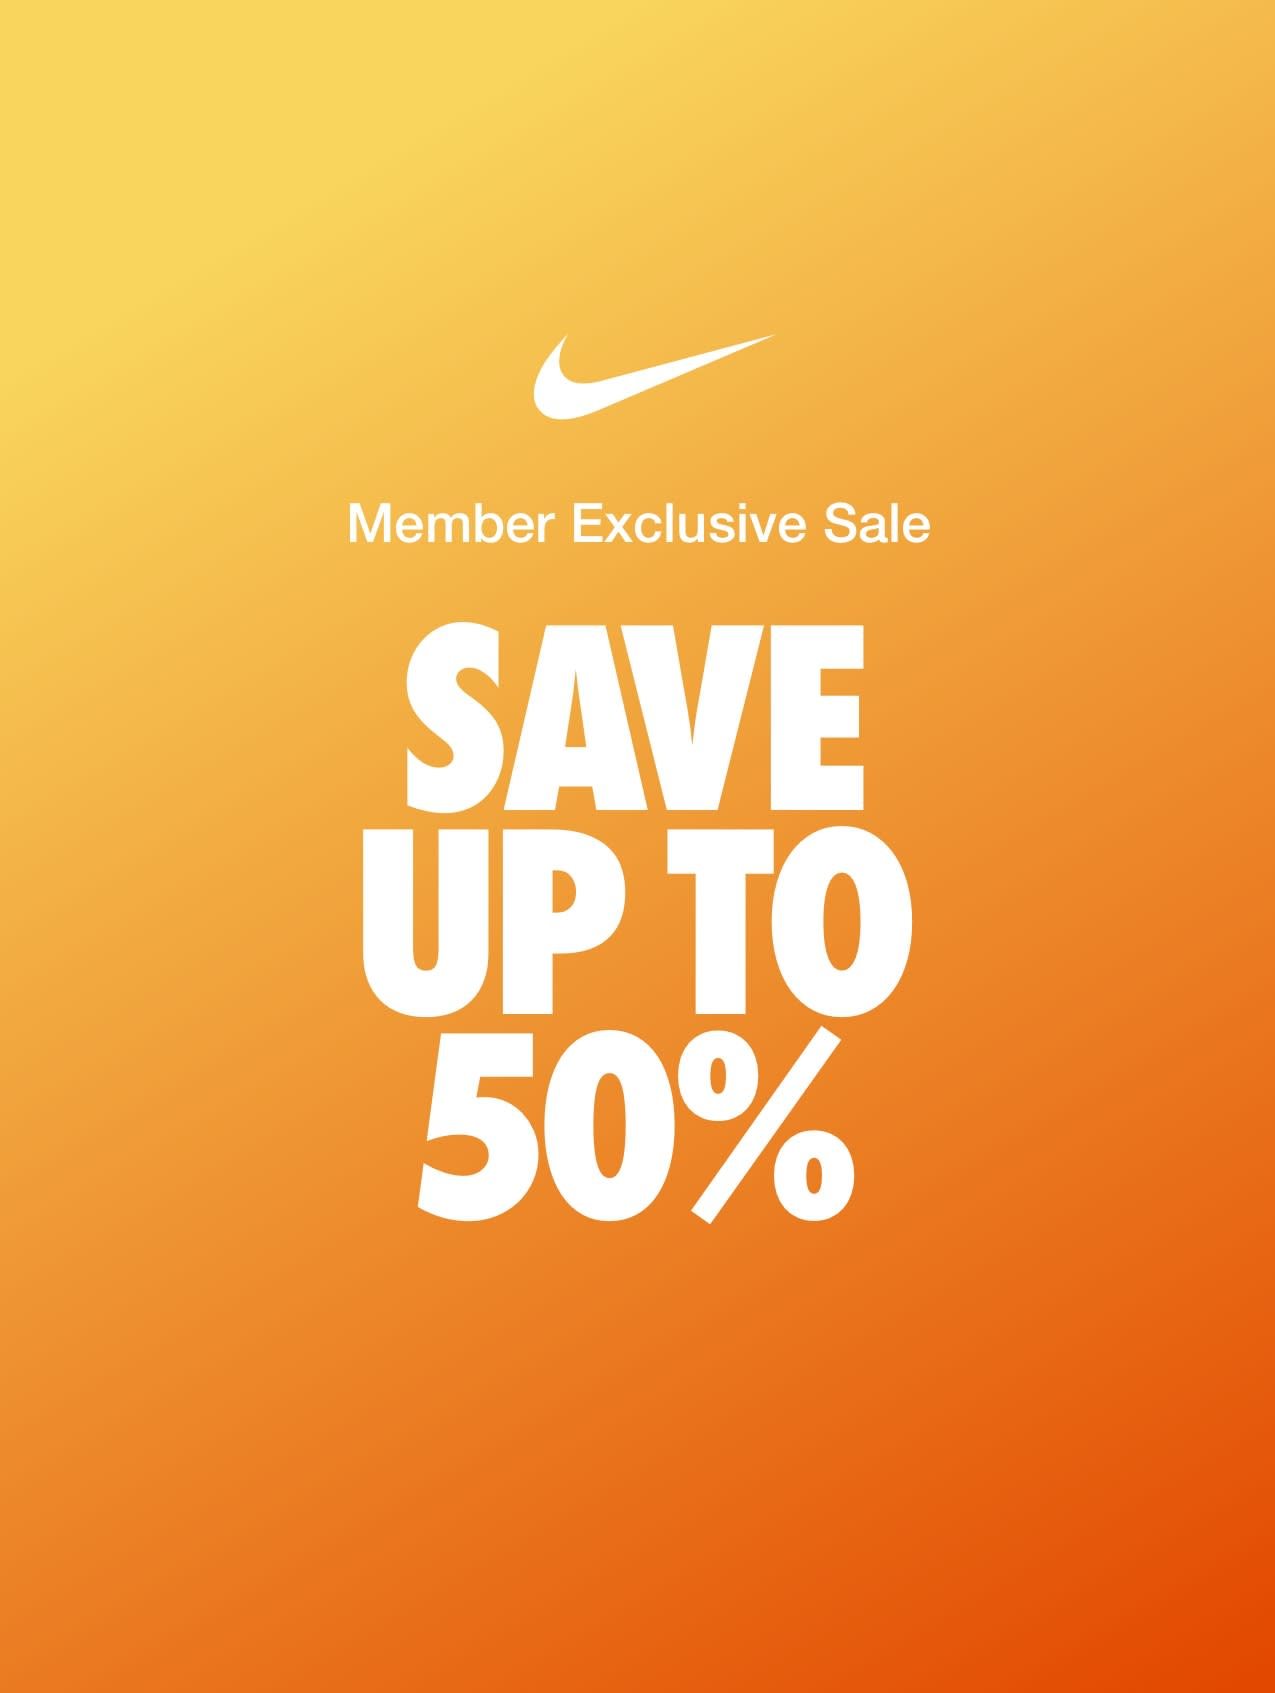 Member Exclusive Sale: Save up to 50 